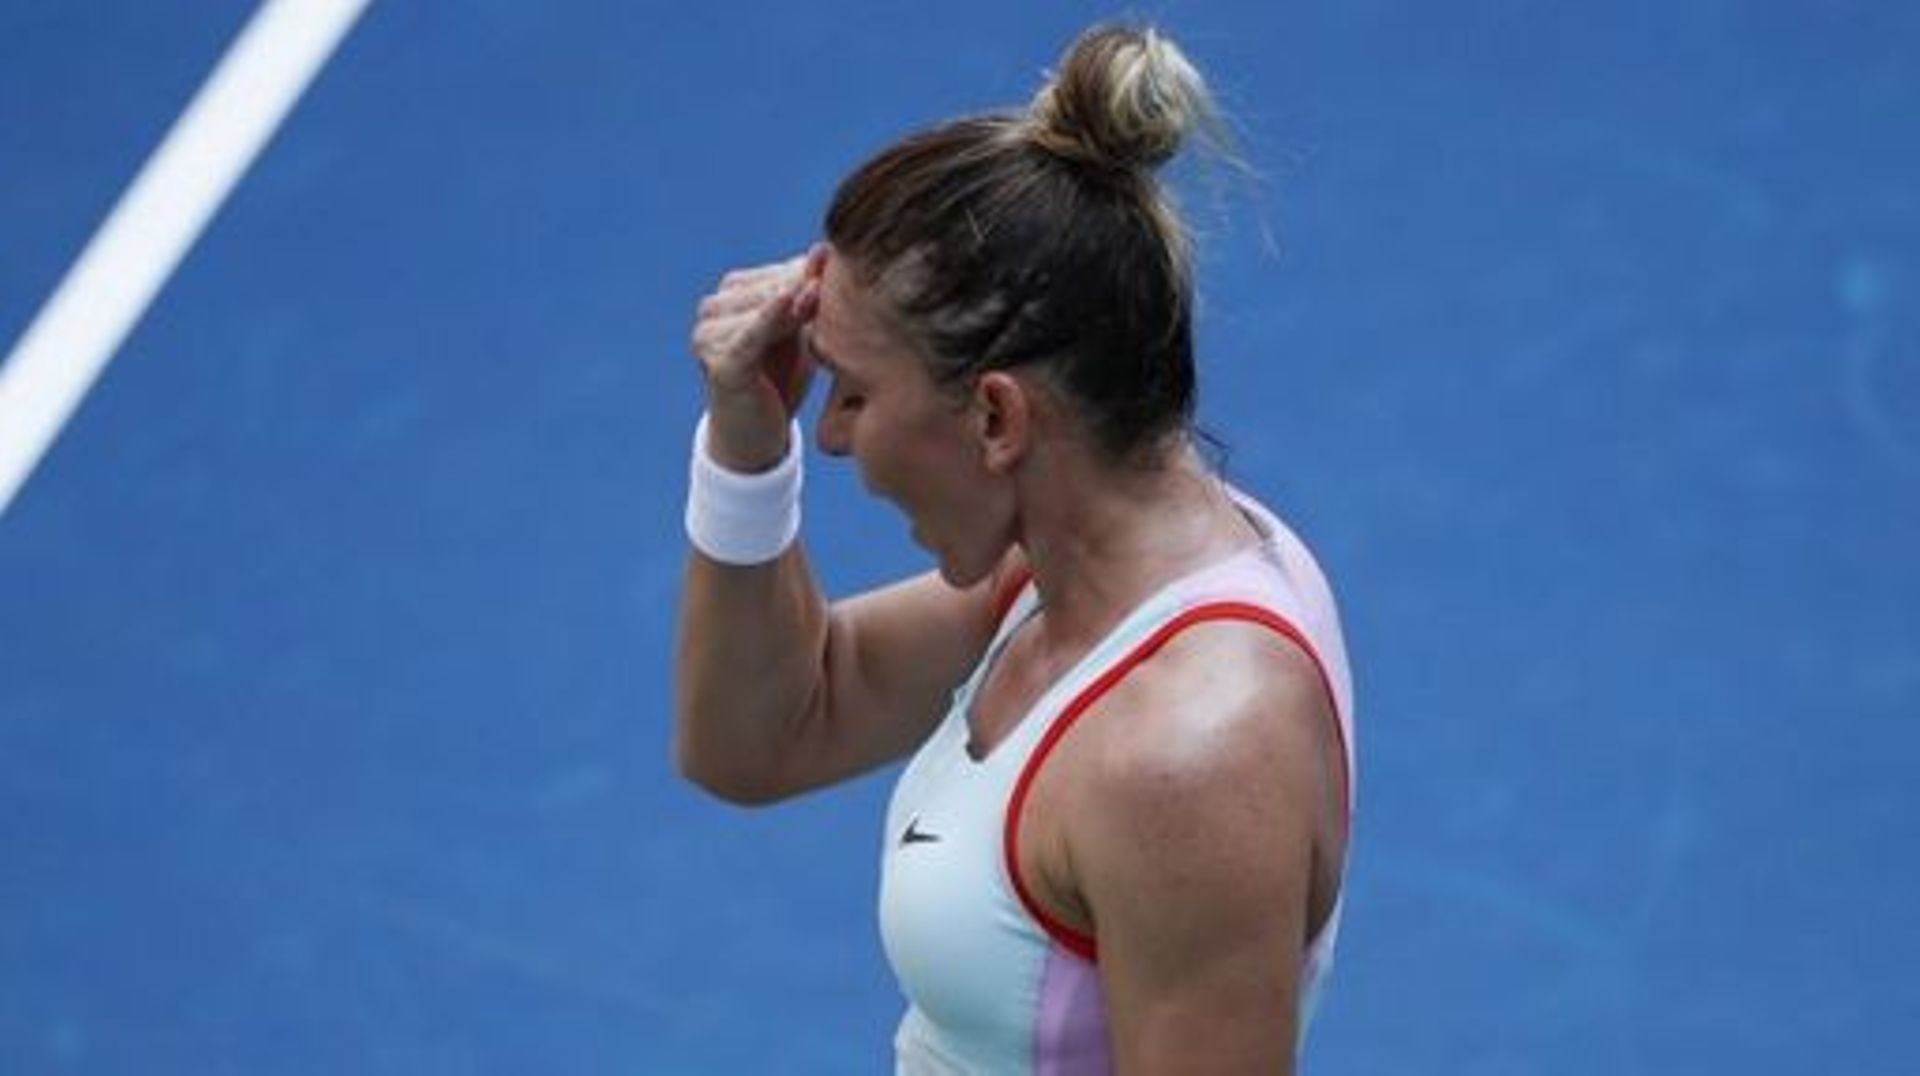 Simona Halep of Romania reacts as she plays against Daria Snigur of Ukraine during their 2022 US Open Tennis tournament women’s singles first round match at the USTA Billie Jean King National Tennis Center in New York, on August 29, 2022. KENA BETANCUR /